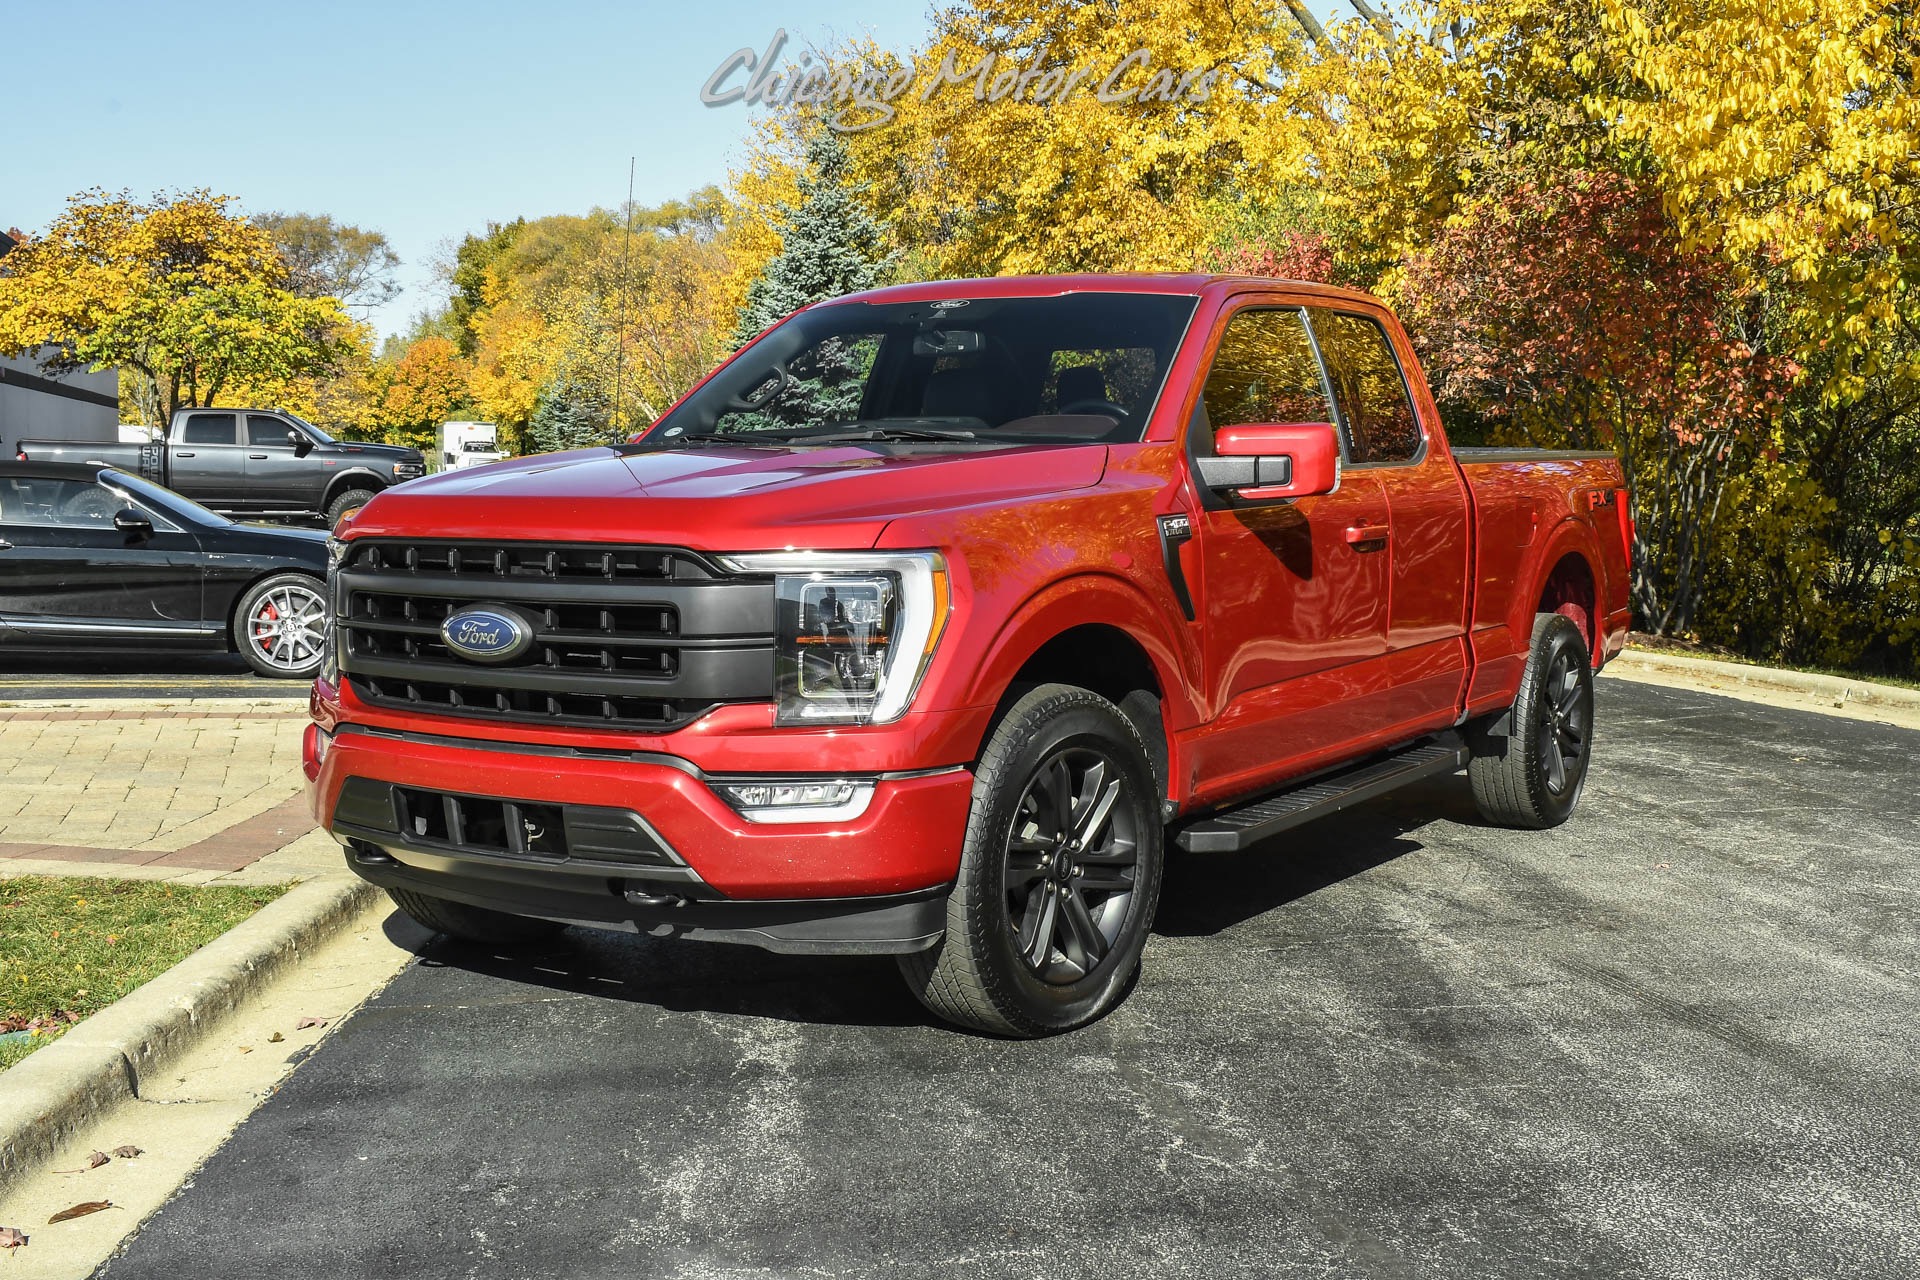 Used 21 Ford F 150 Lariat 4x4 Supercab Pickup 5 0 V8 For Sale 51 800 Chicago Motor Cars Stock